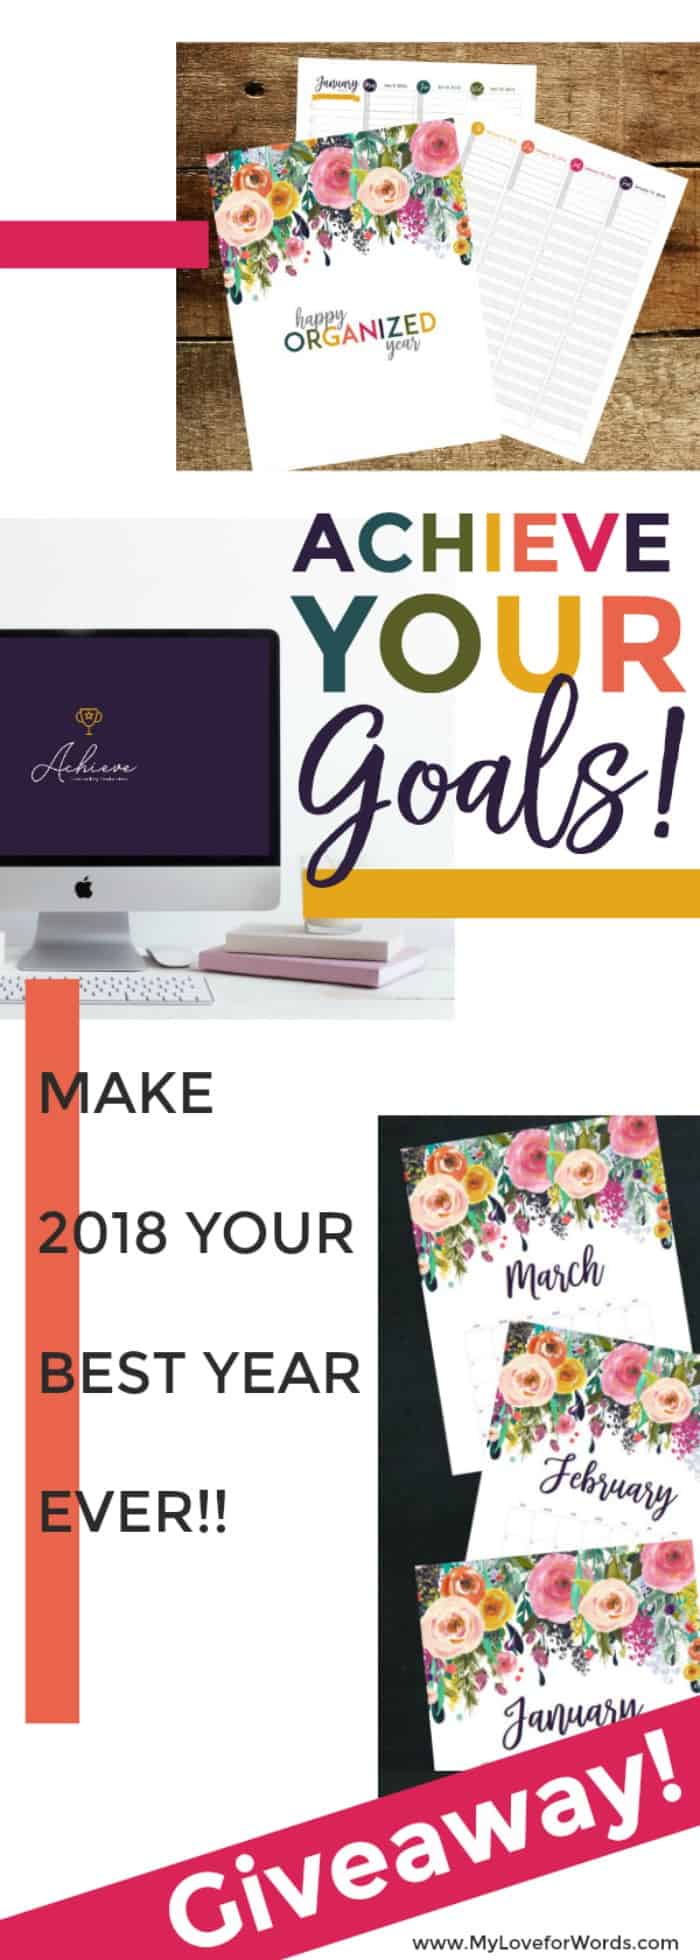 Make 2018 your BEST YEAR EVER!! Setting goals and being intentional with your time can make all the difference between having a blah year and a great one! Enter to win this 2018 planning and goal setting bundle, and have your best year ever! One lucky winner will win: a printable 2018 planner, printable goals workbook, and membership to the exclusive goal setting masterclass and goal achieving community so you'll get the guidance, support, and inspiration you need to make 2018 on for the books! #planner #printablecalendar #goals #2018 #calendar #printables #organization